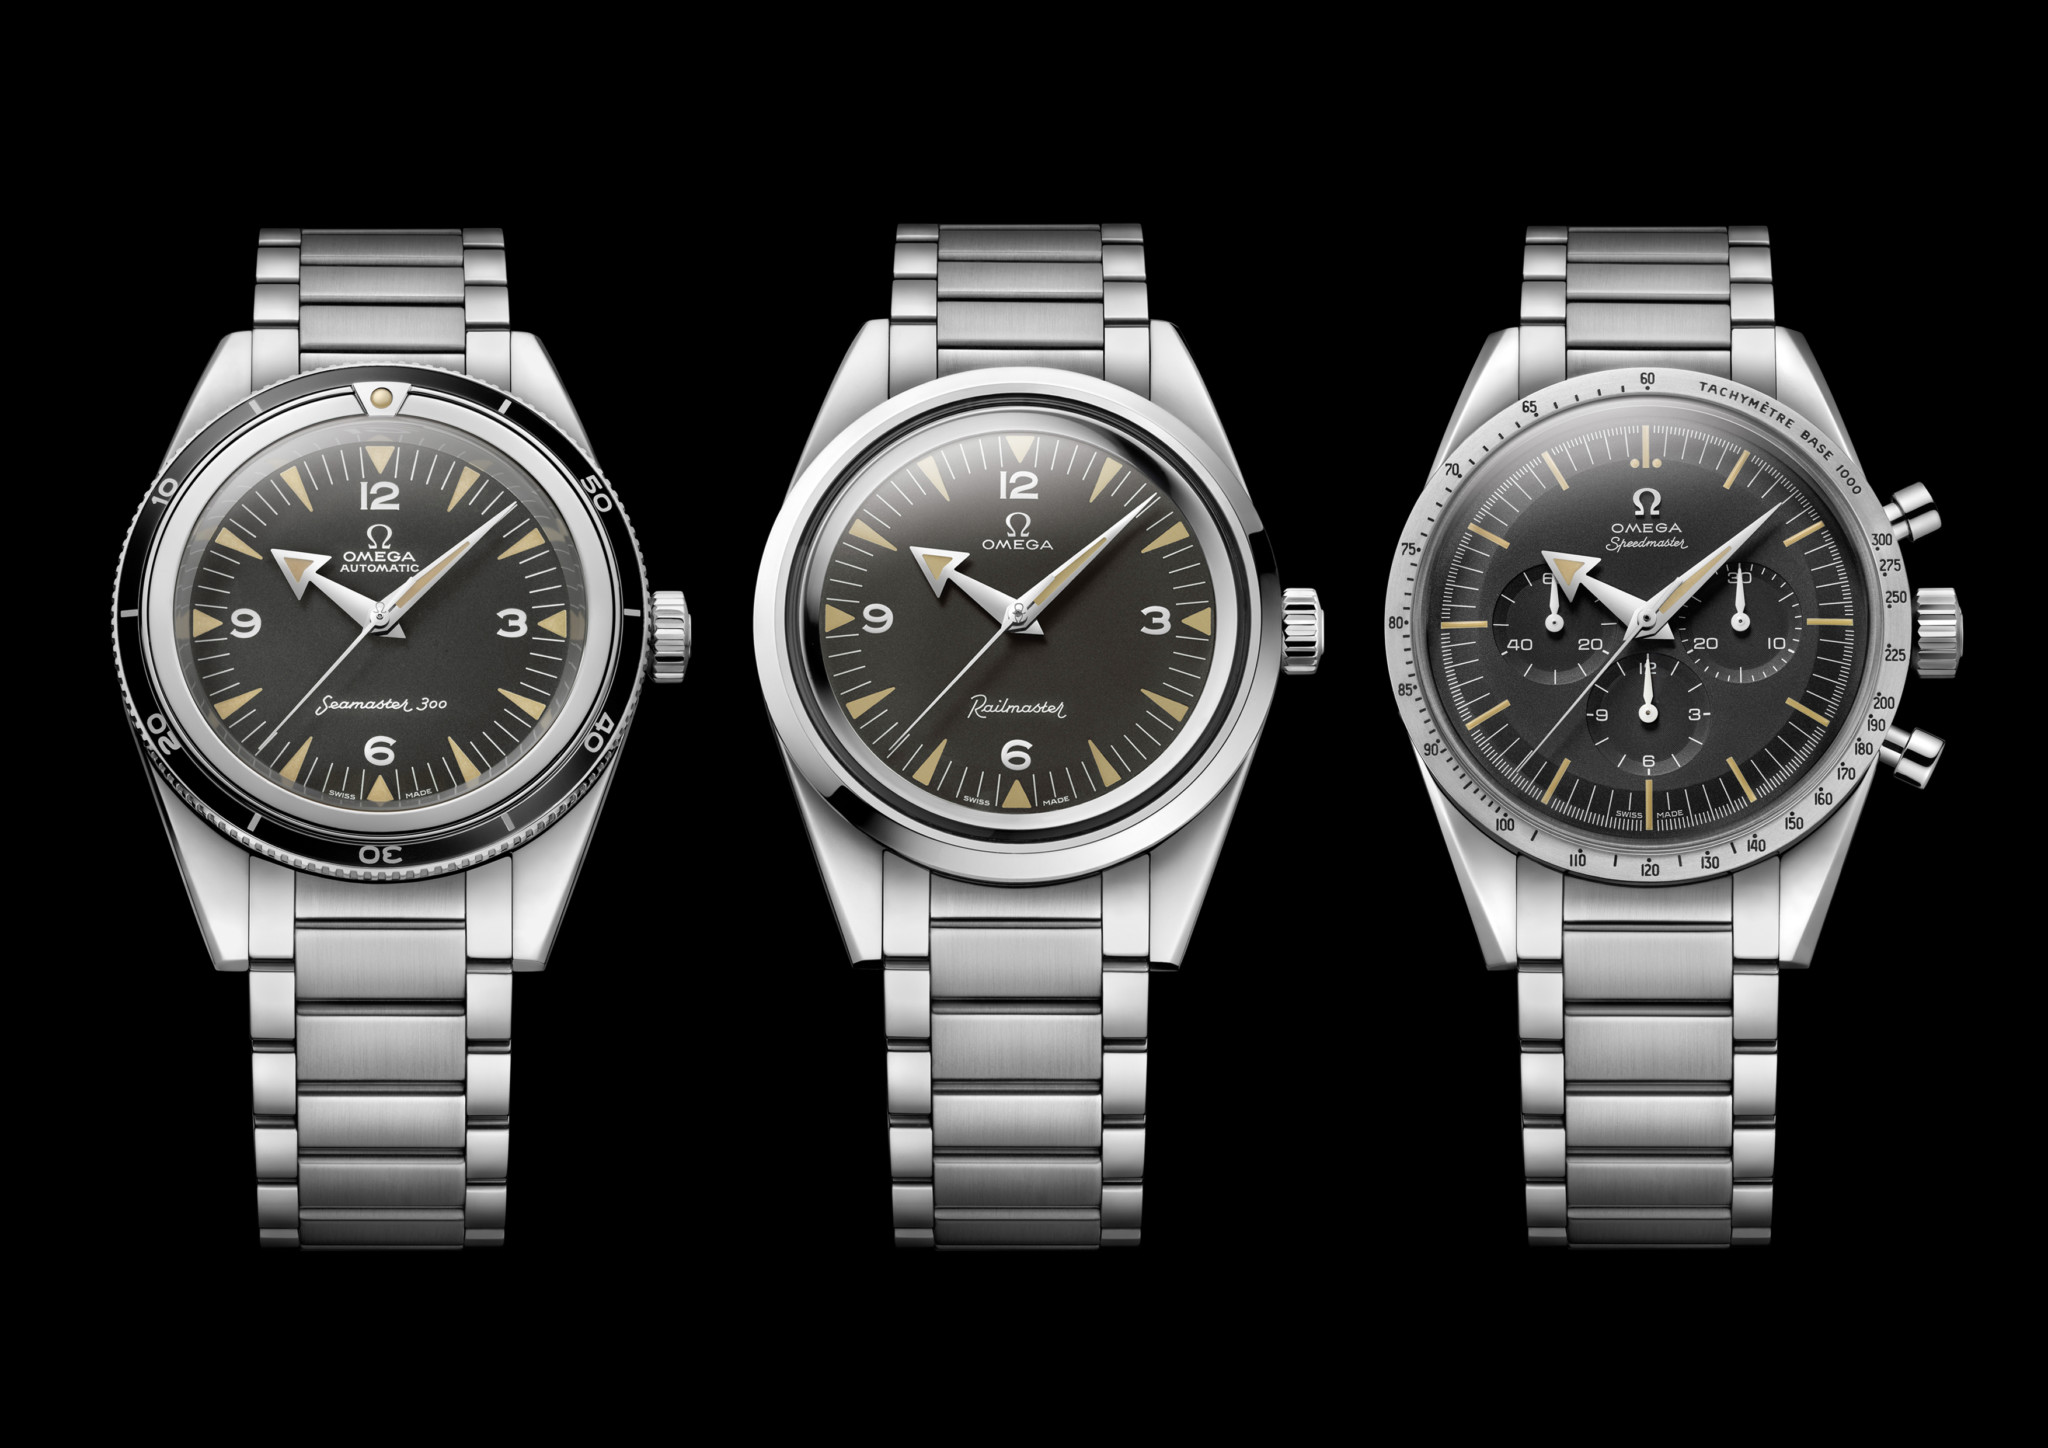 The trilogy of anniversary models from omega is made up of the seamaster, railmaster and speedmaster.